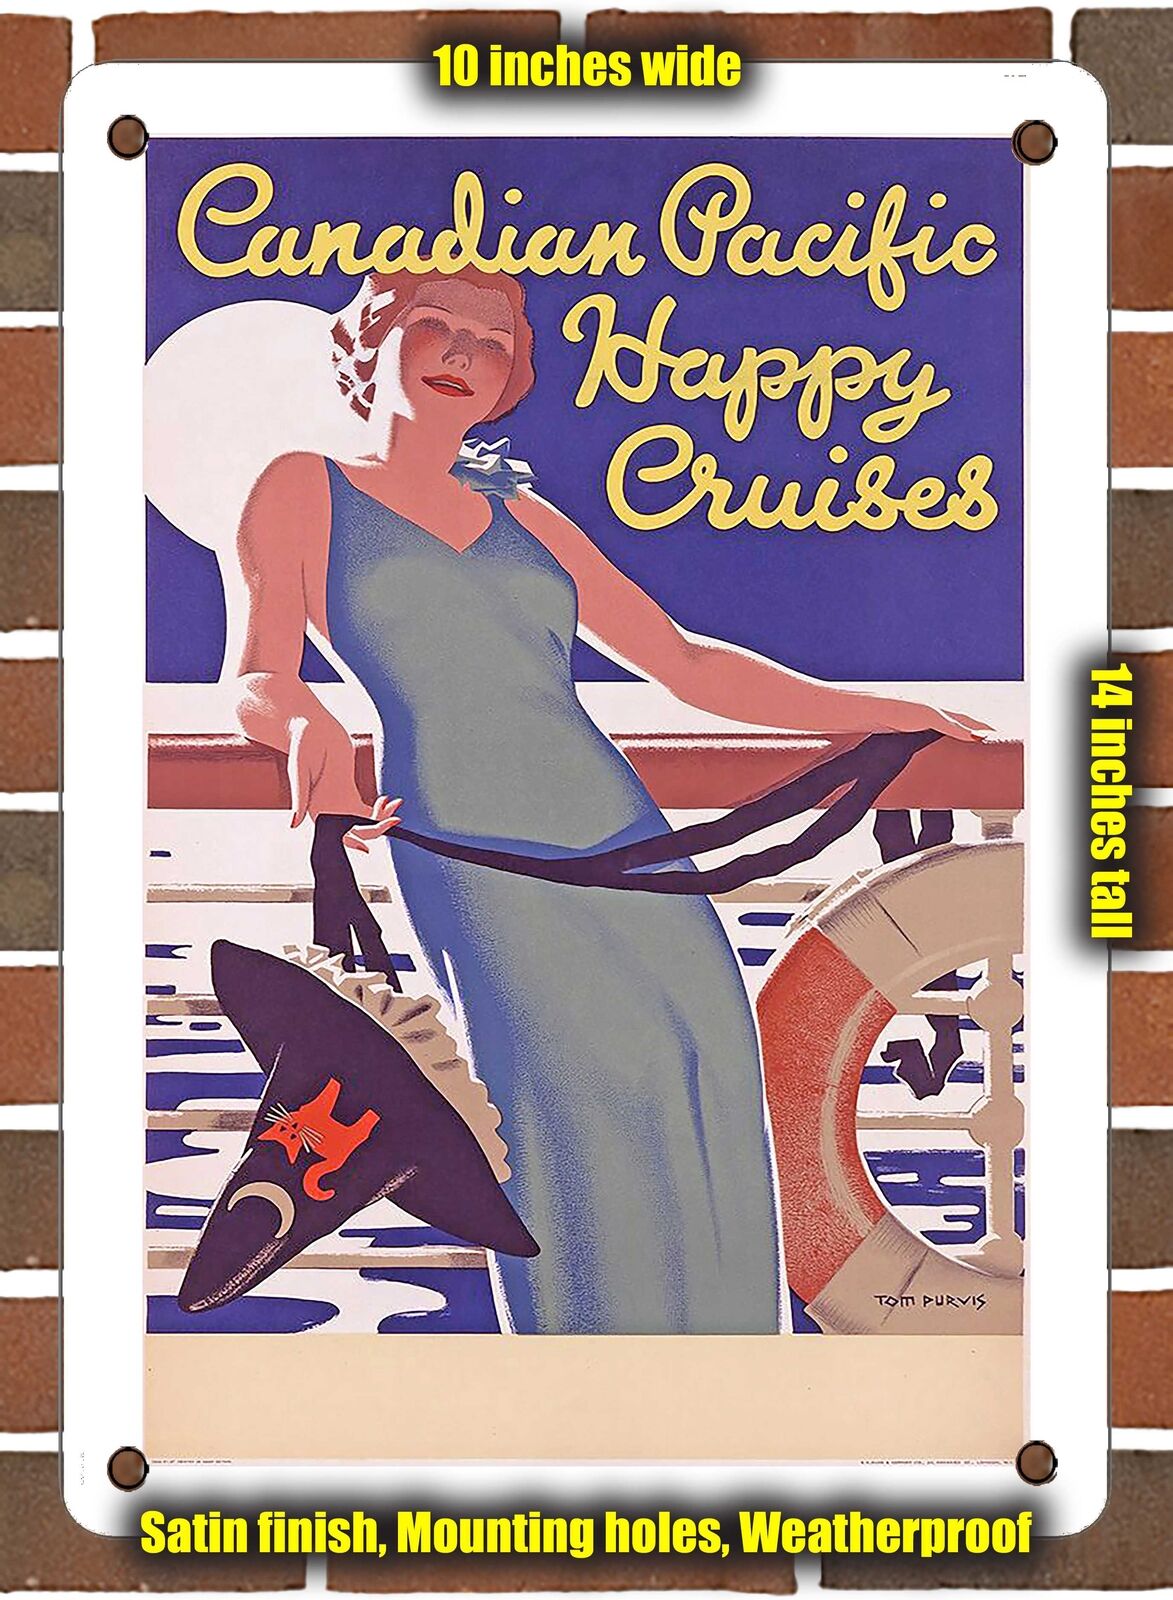 METAL SIGN - 1937 Canadian Pacific Happy Cruises - 10x14 Inches